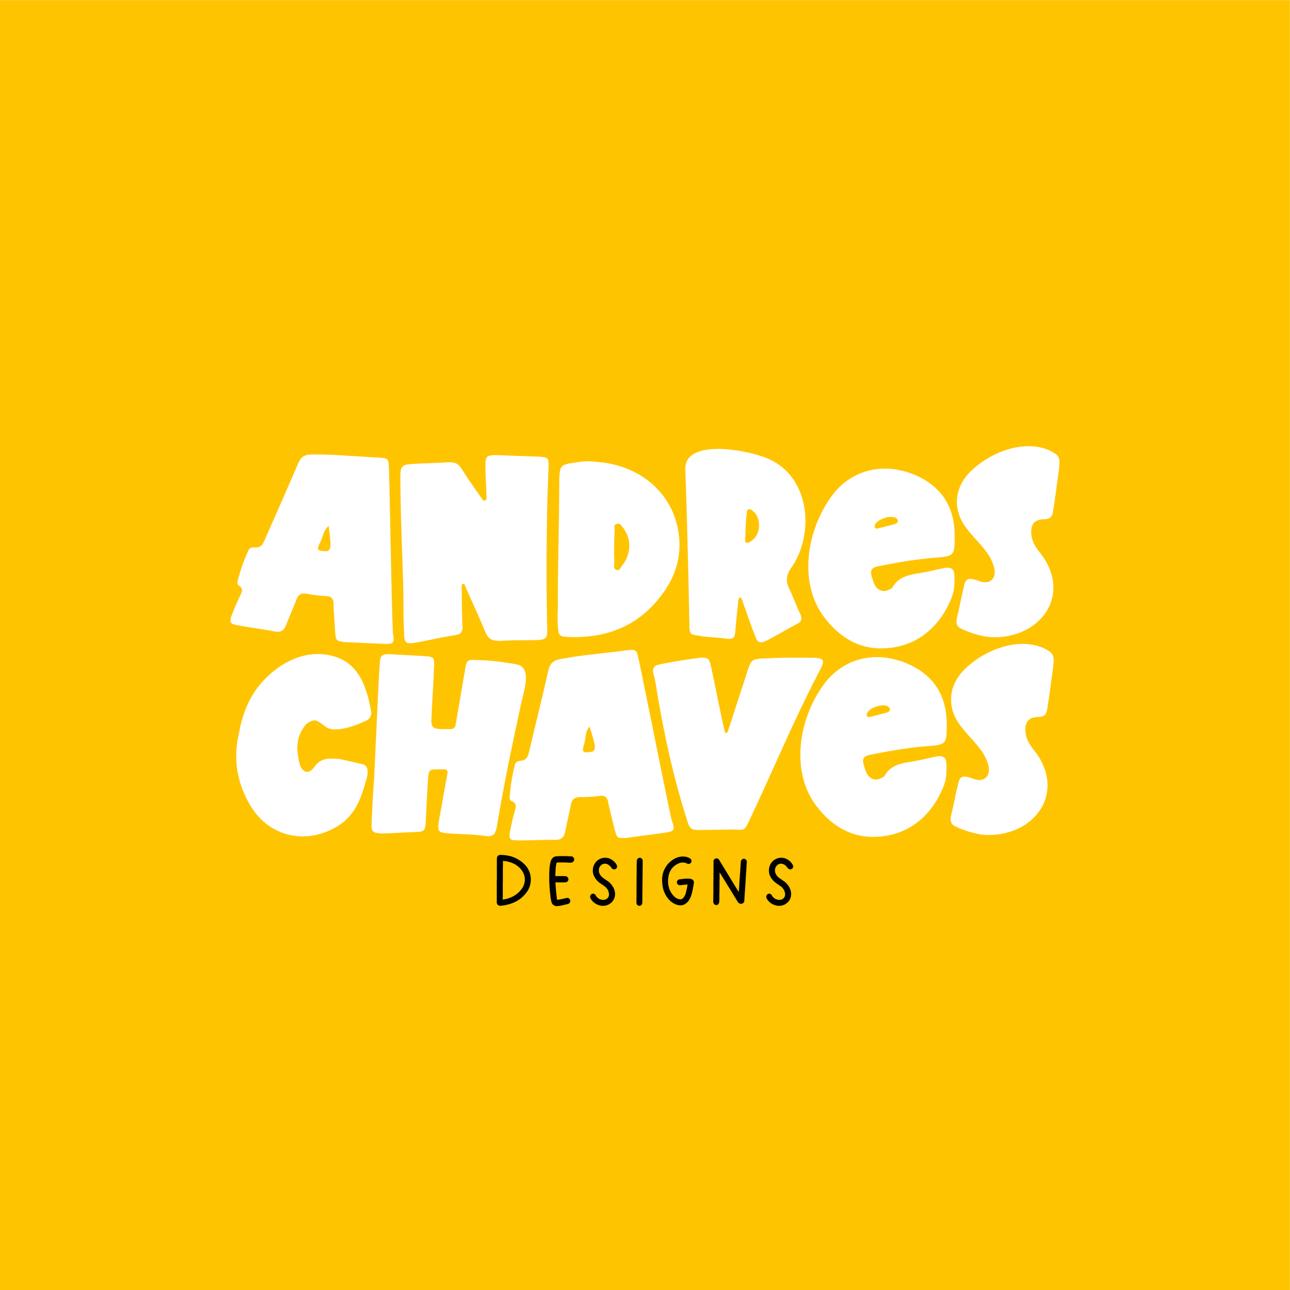 Andres Chaves's images